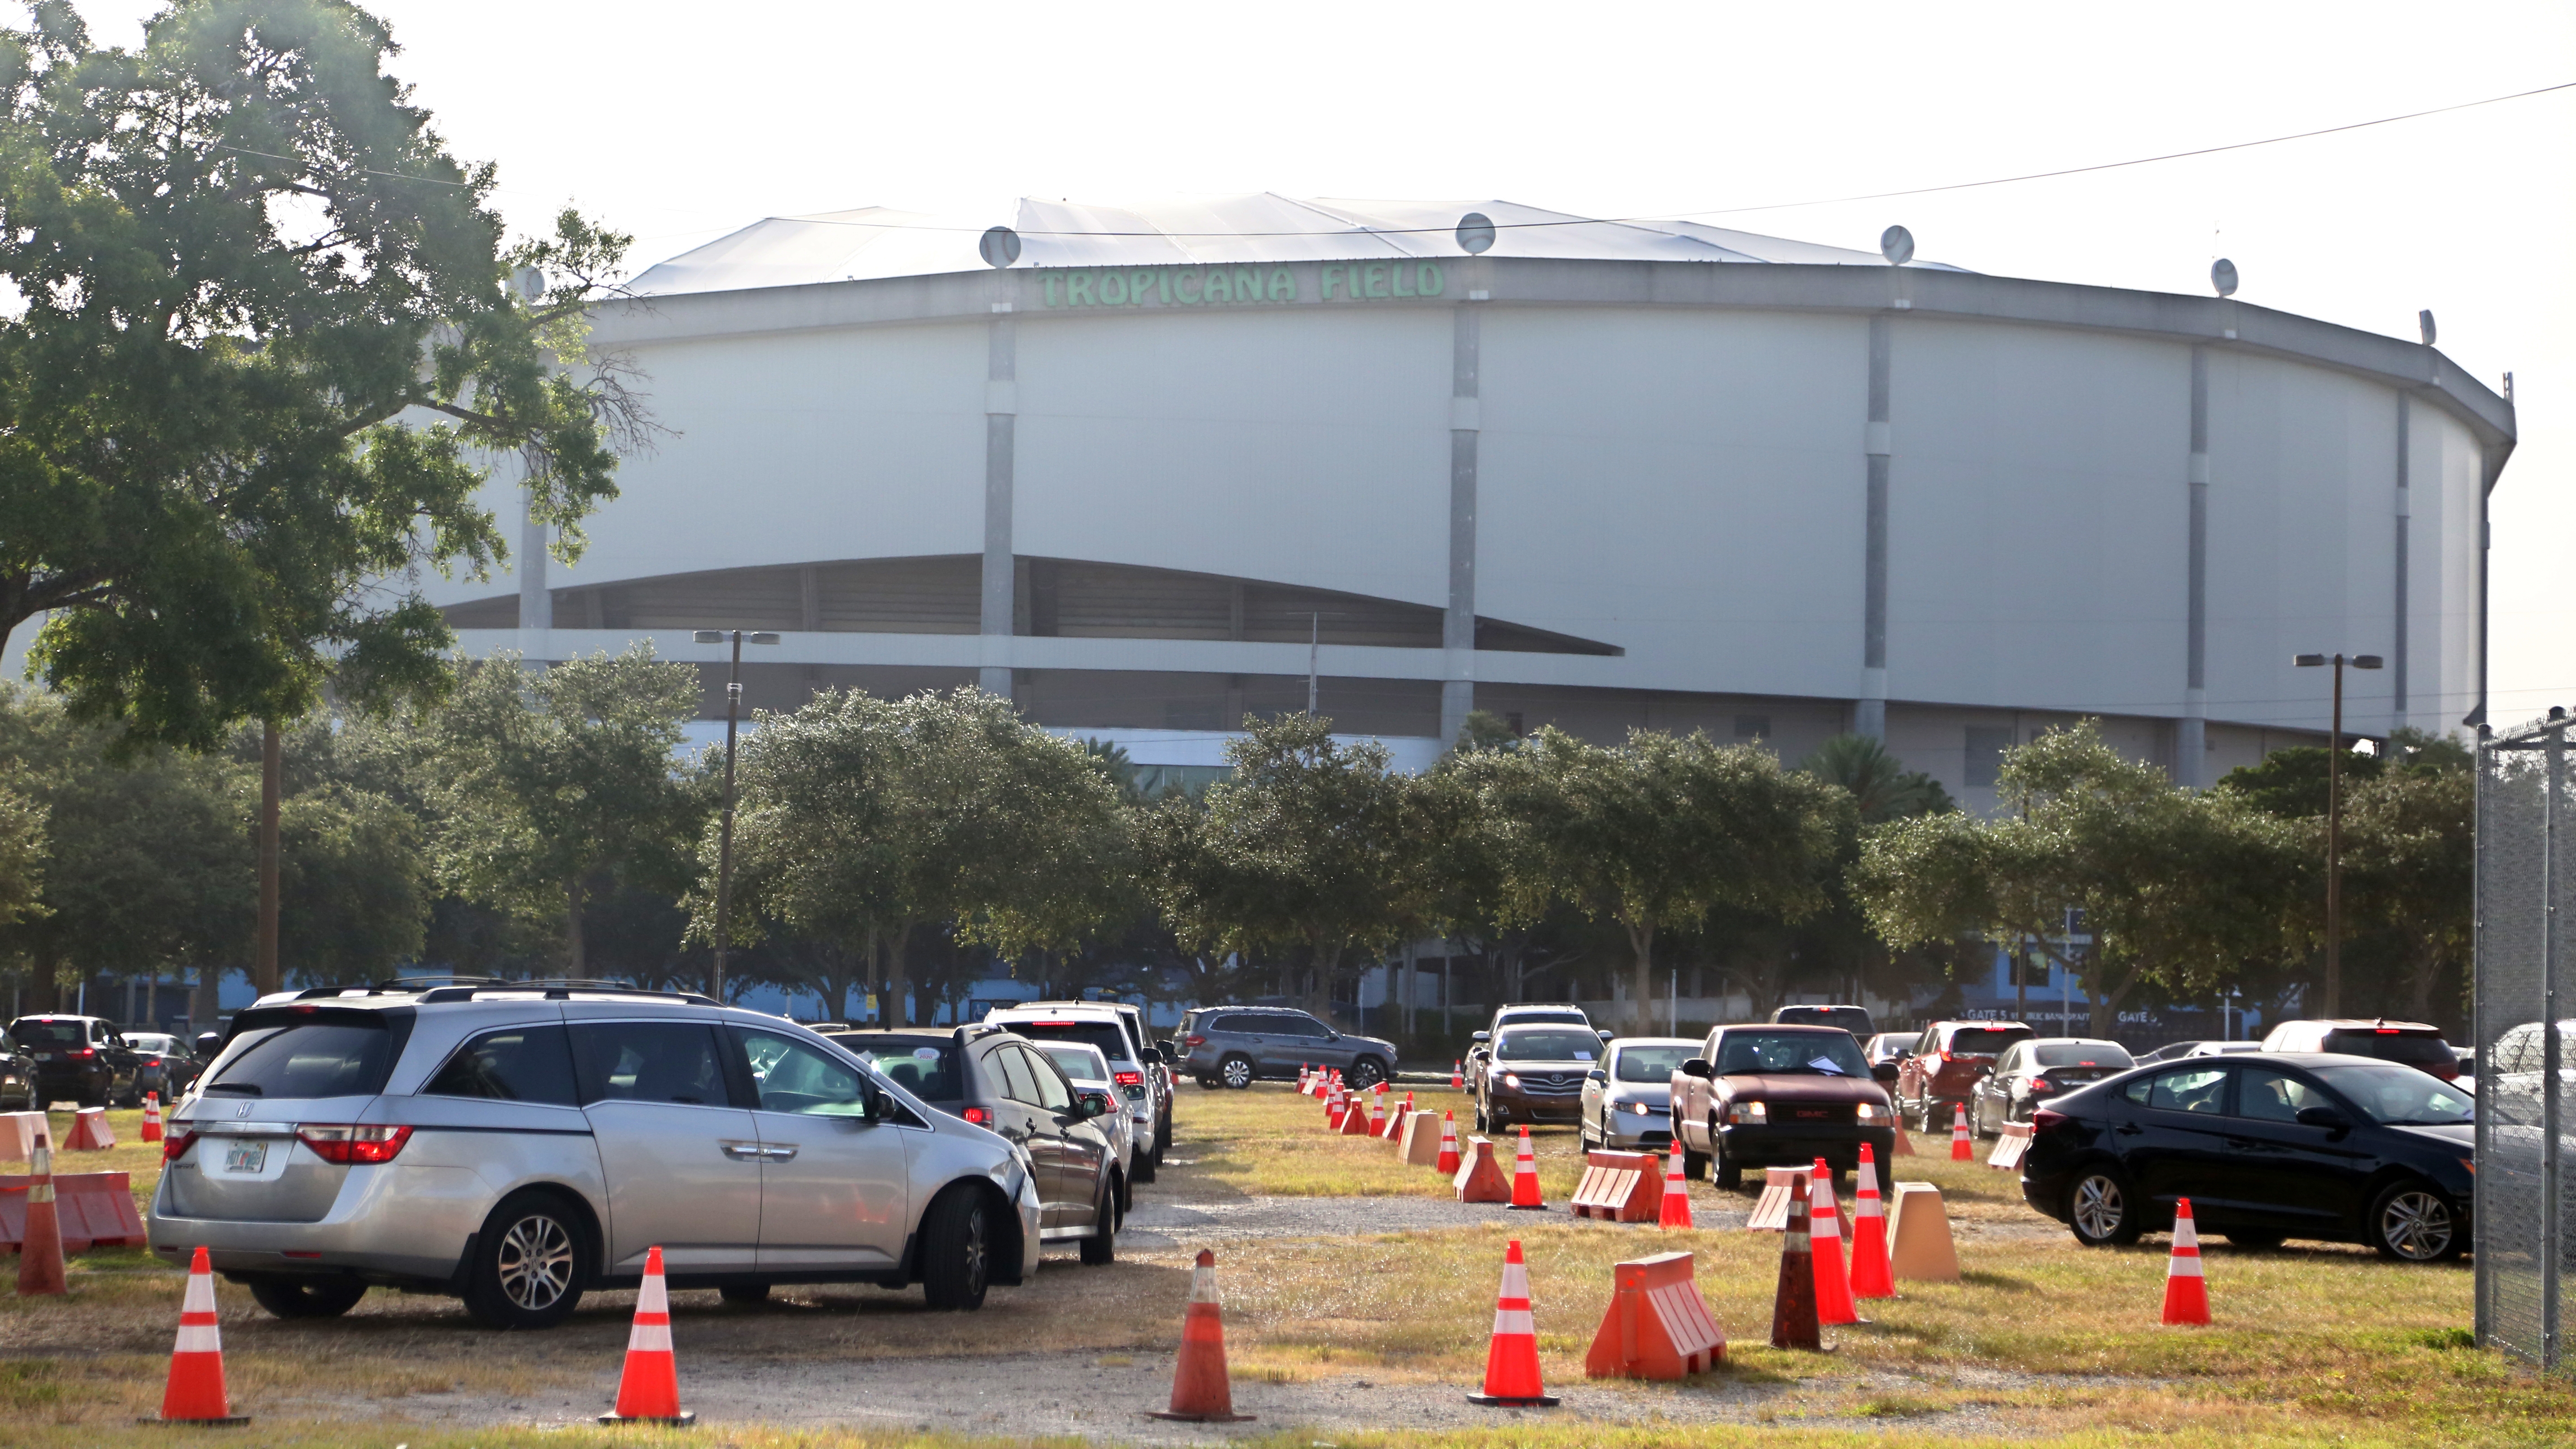 FREE GUIDE] Tropicana Field Parking Tips - Tampa Bay Rays